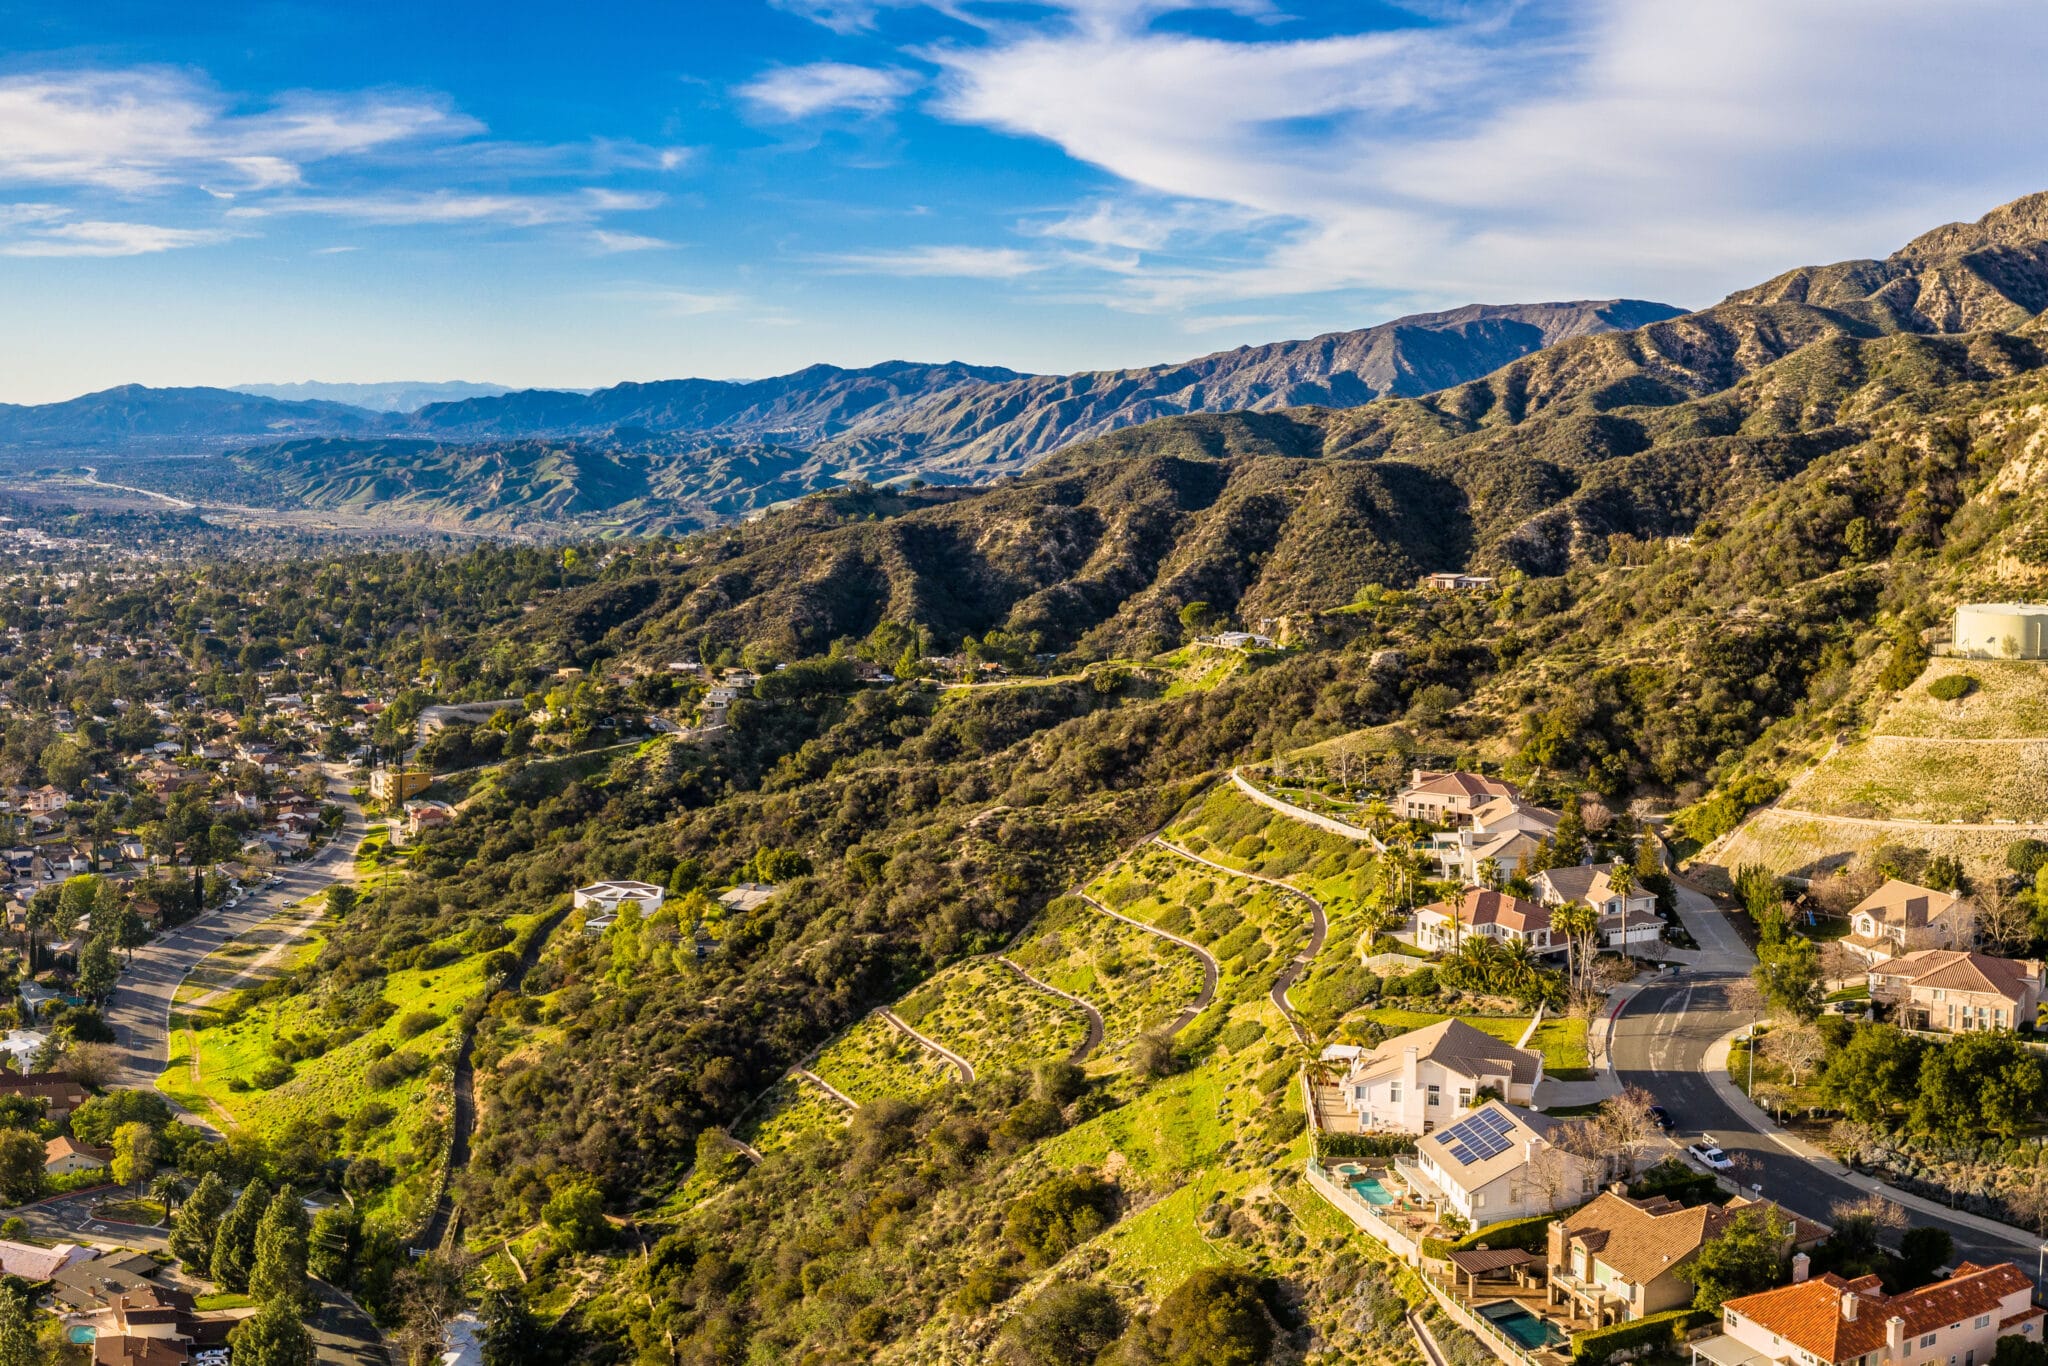 The City of Glendale is in the Verdugo Mountains region of Los Angeles County